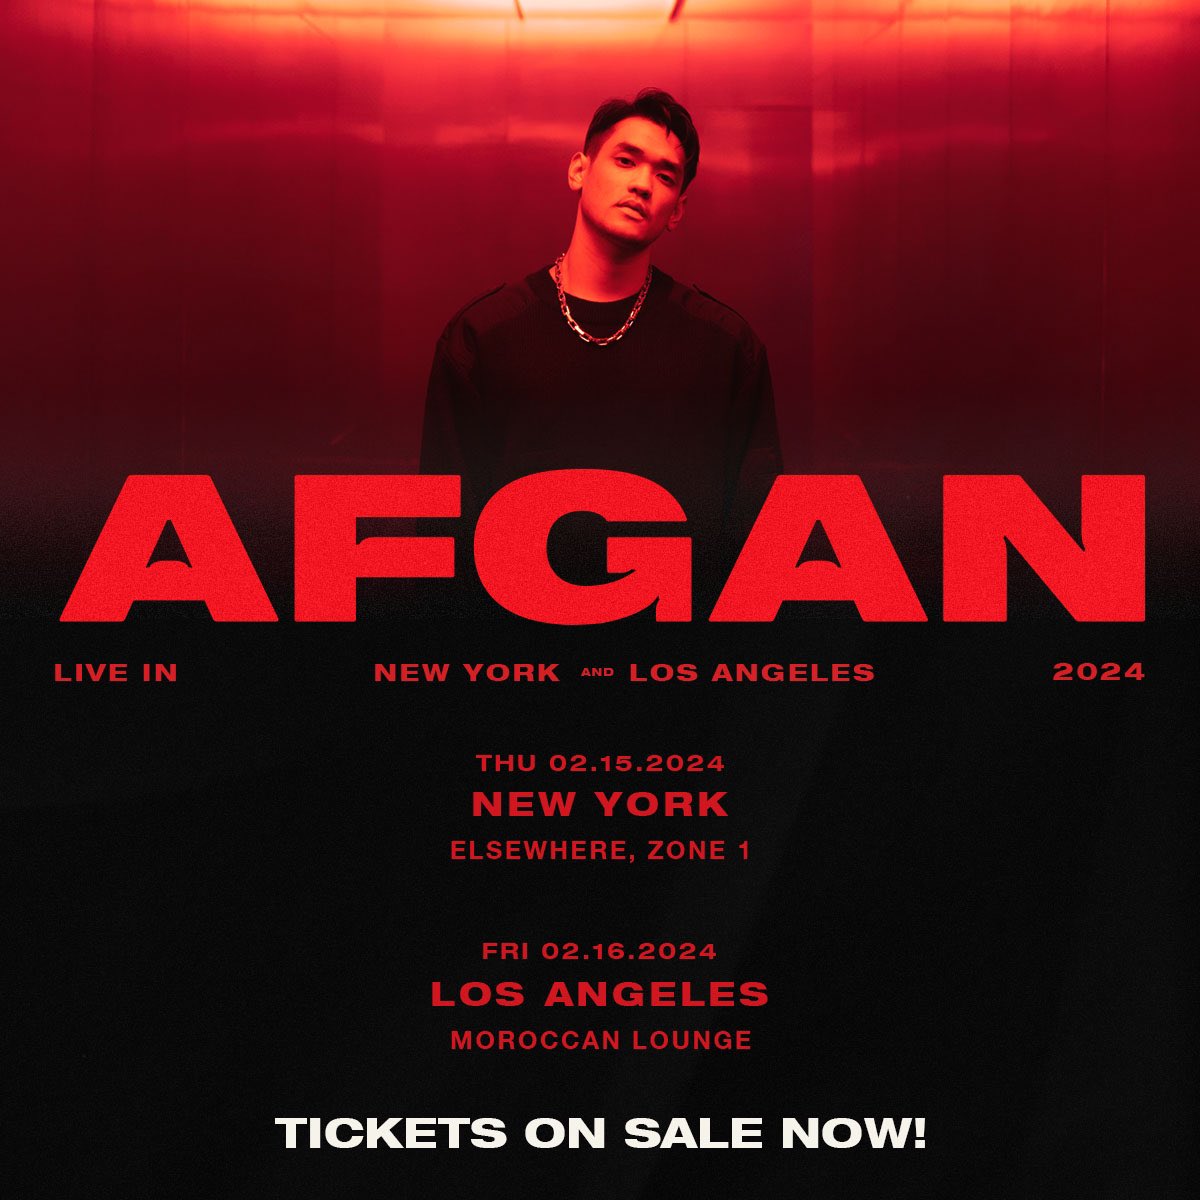 Tickets to my US shows are now available to purchase! Grab yours now👇🏻 NY lnk.to/AFGANNYSHOW LA lnk.to/AFGANLASHOW